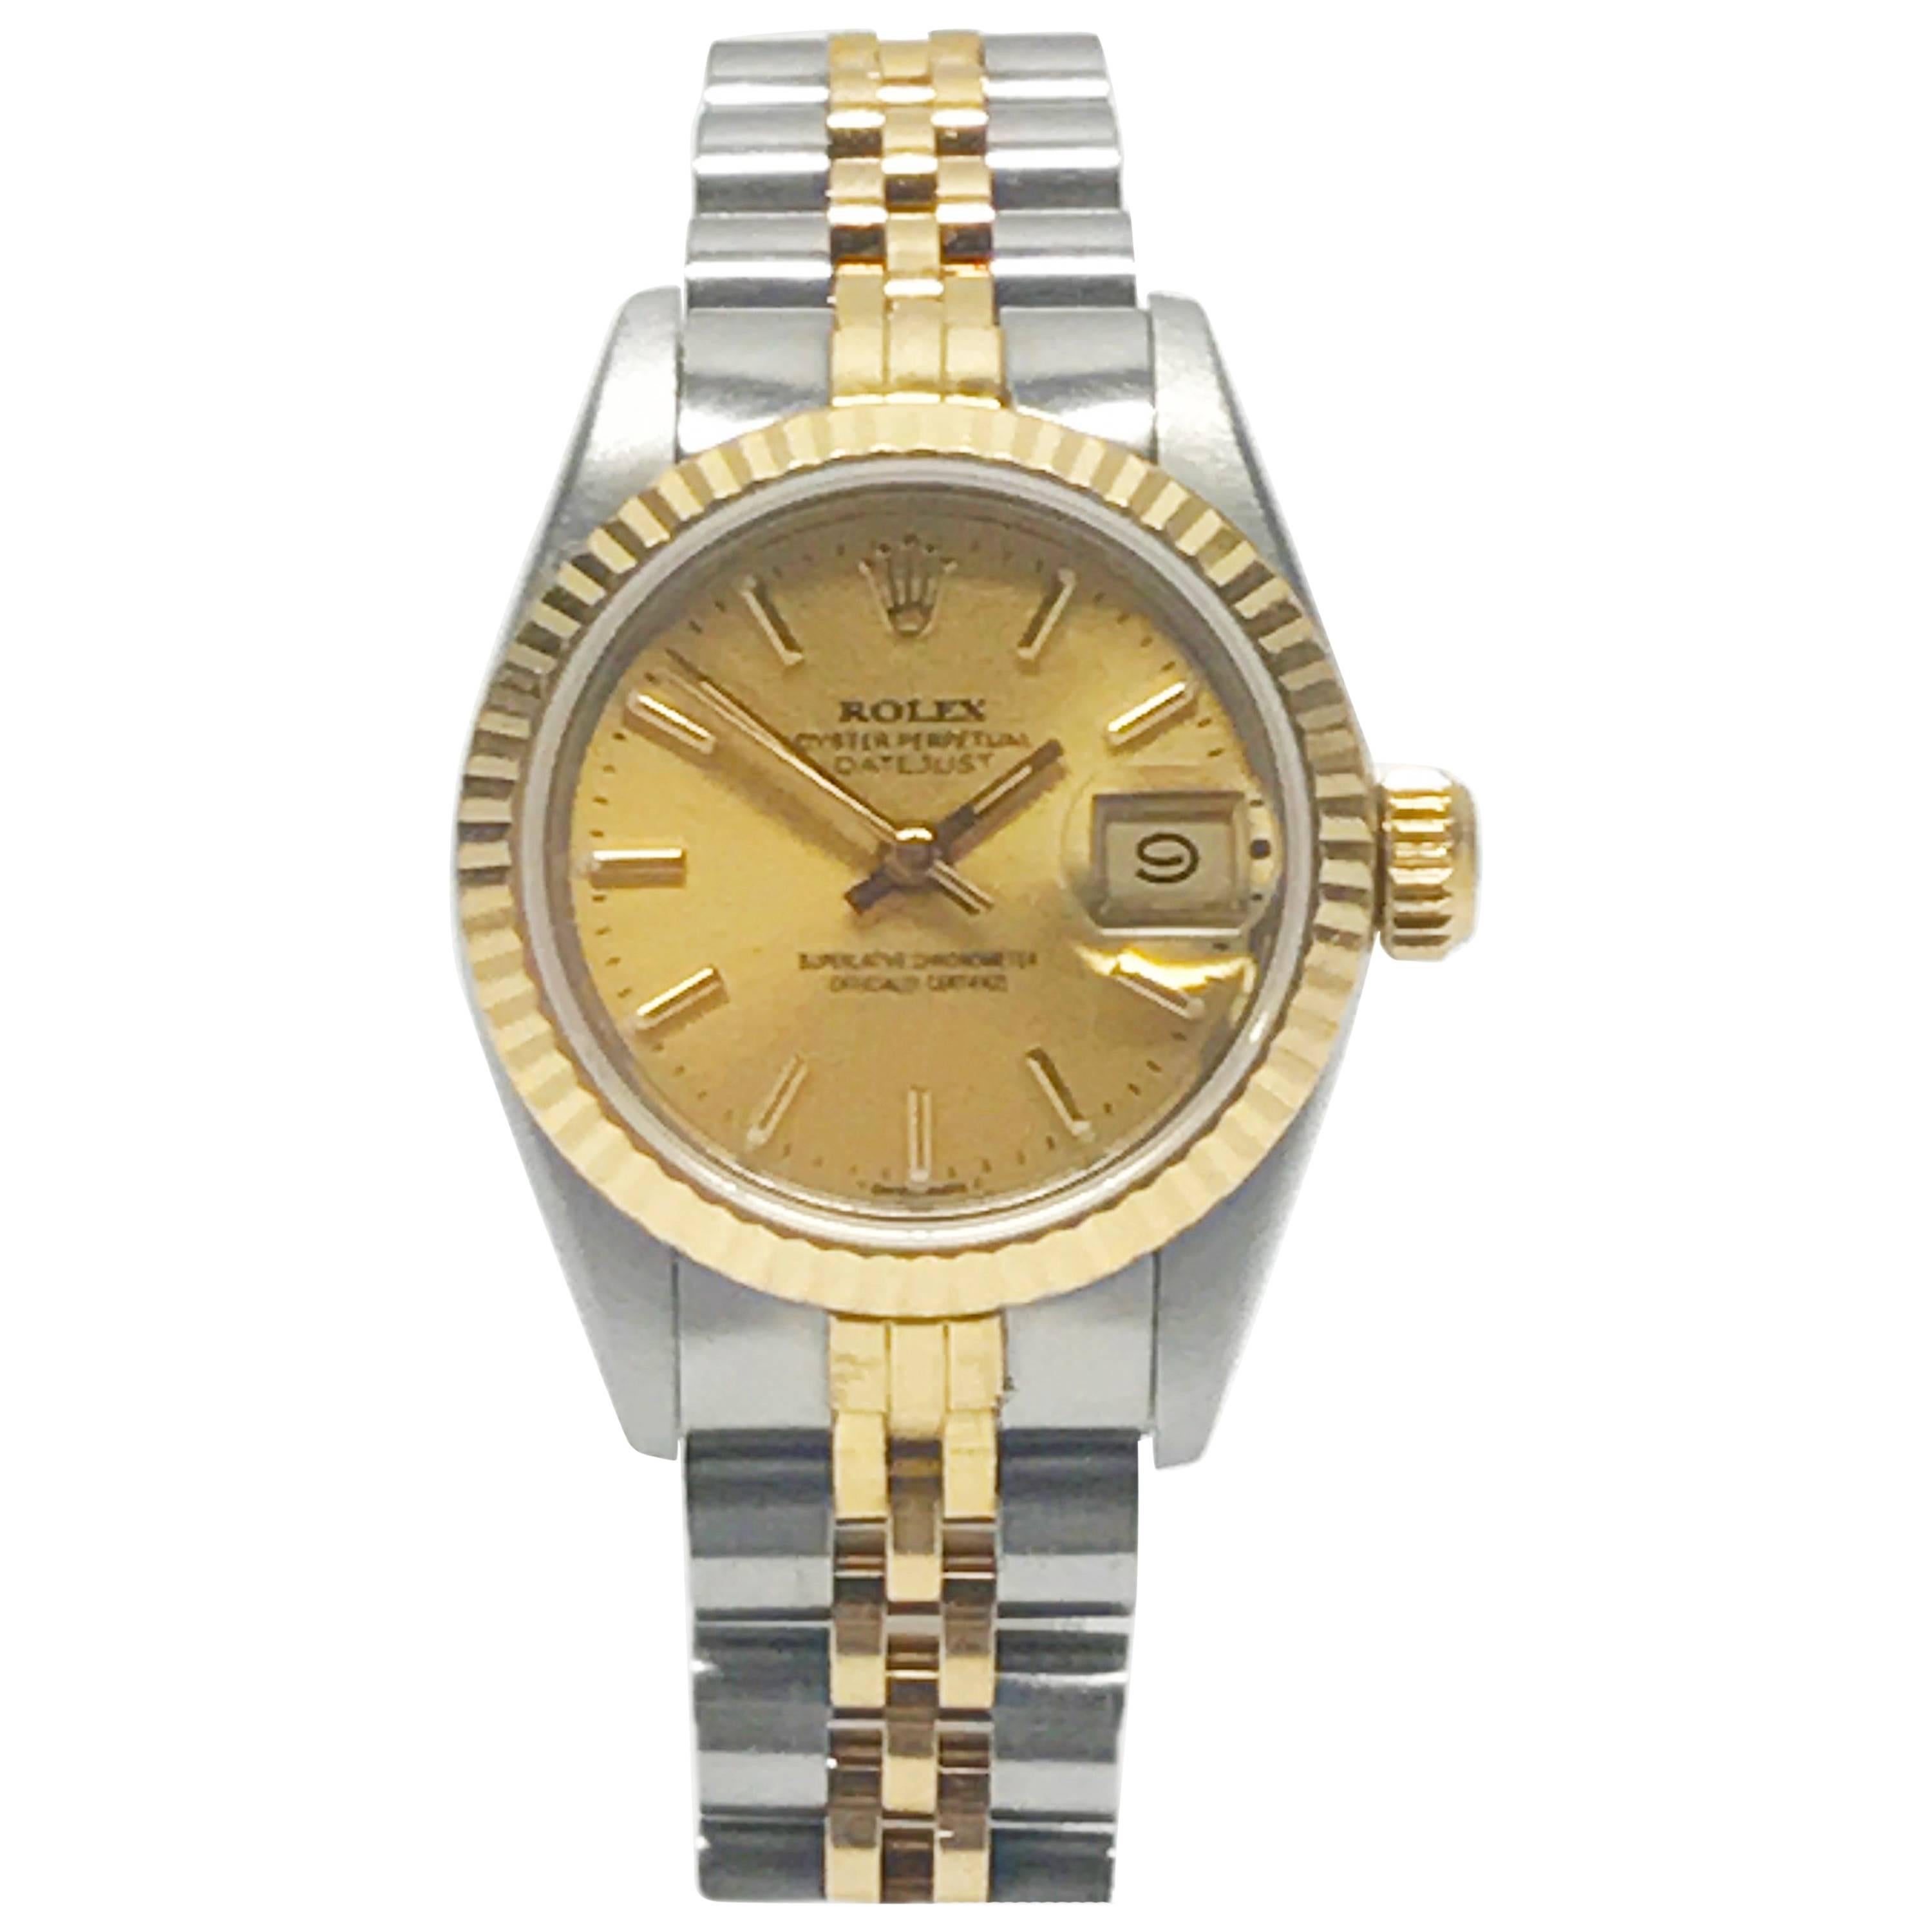 Rolex Stainless Steel and Yellow Gold Two-Tone Ladies Datejust Wristwatch